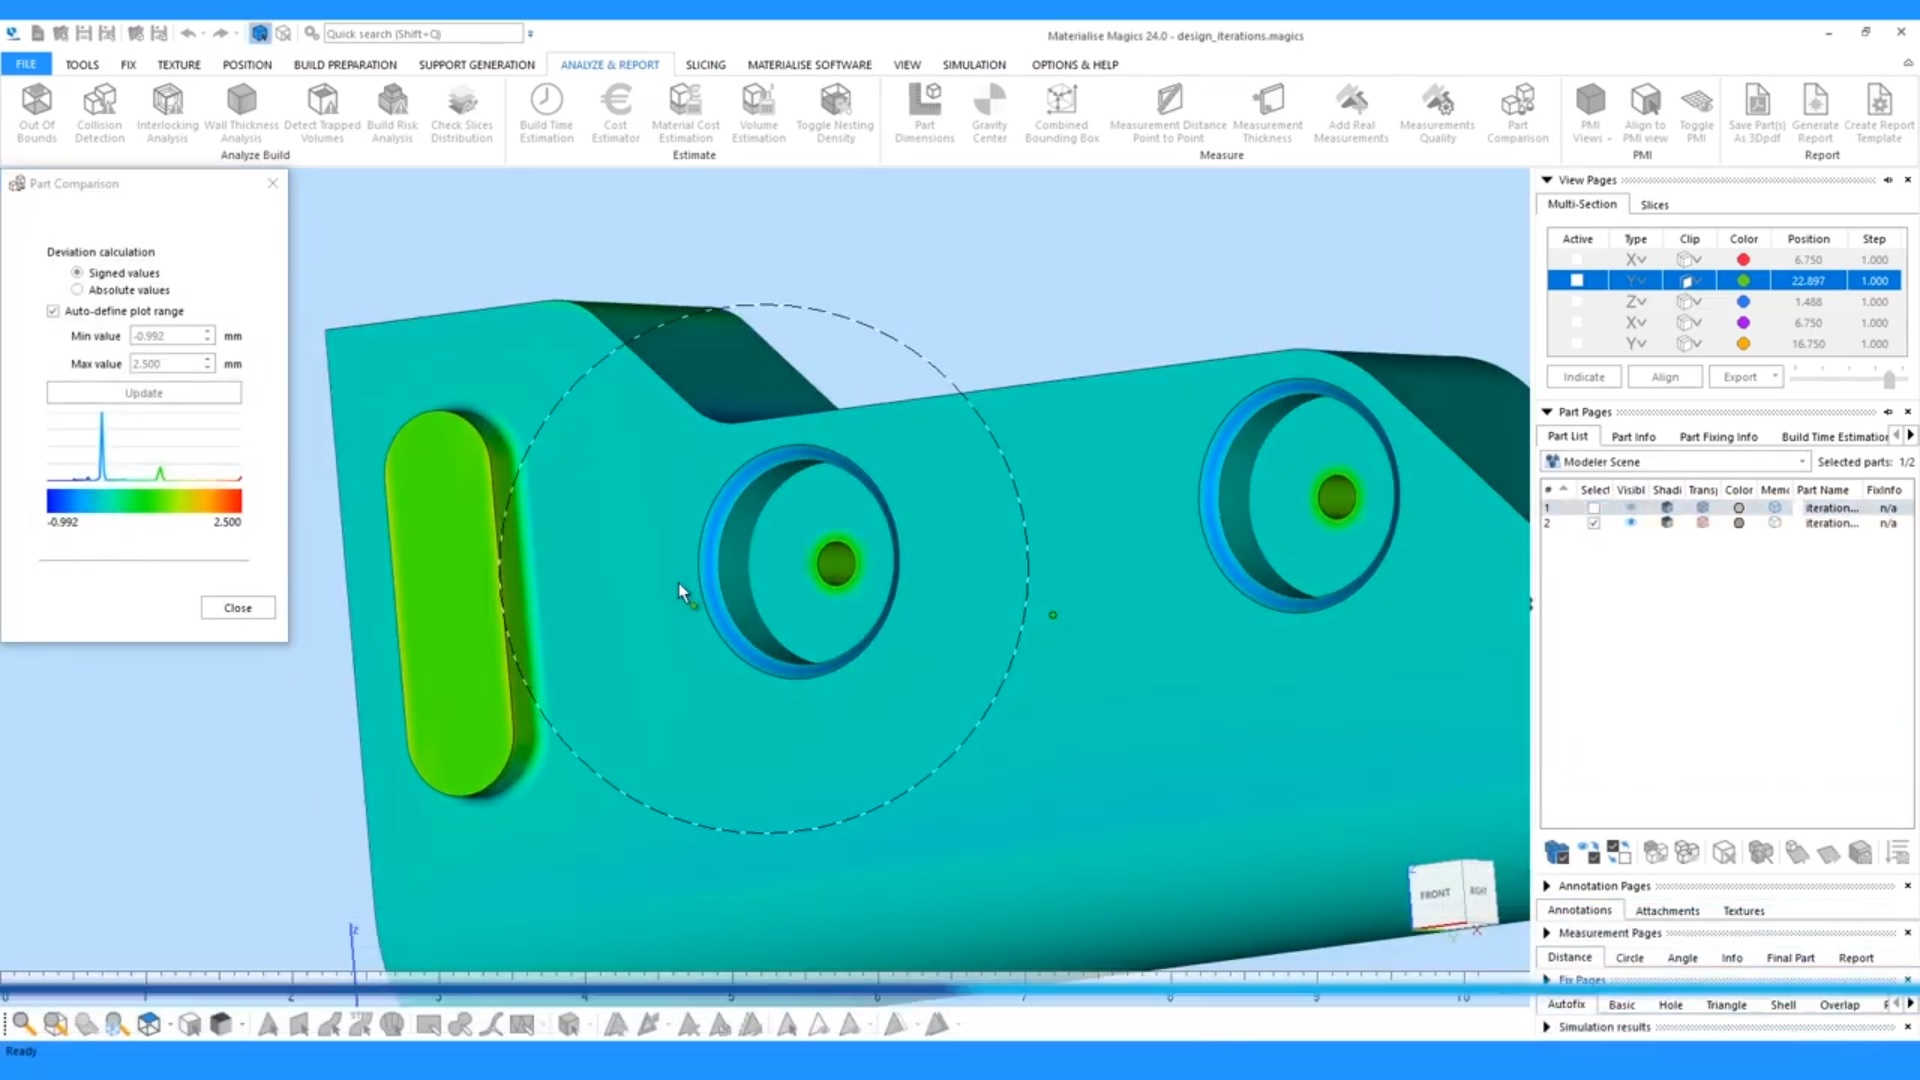 What's new in Materialise Magics 24